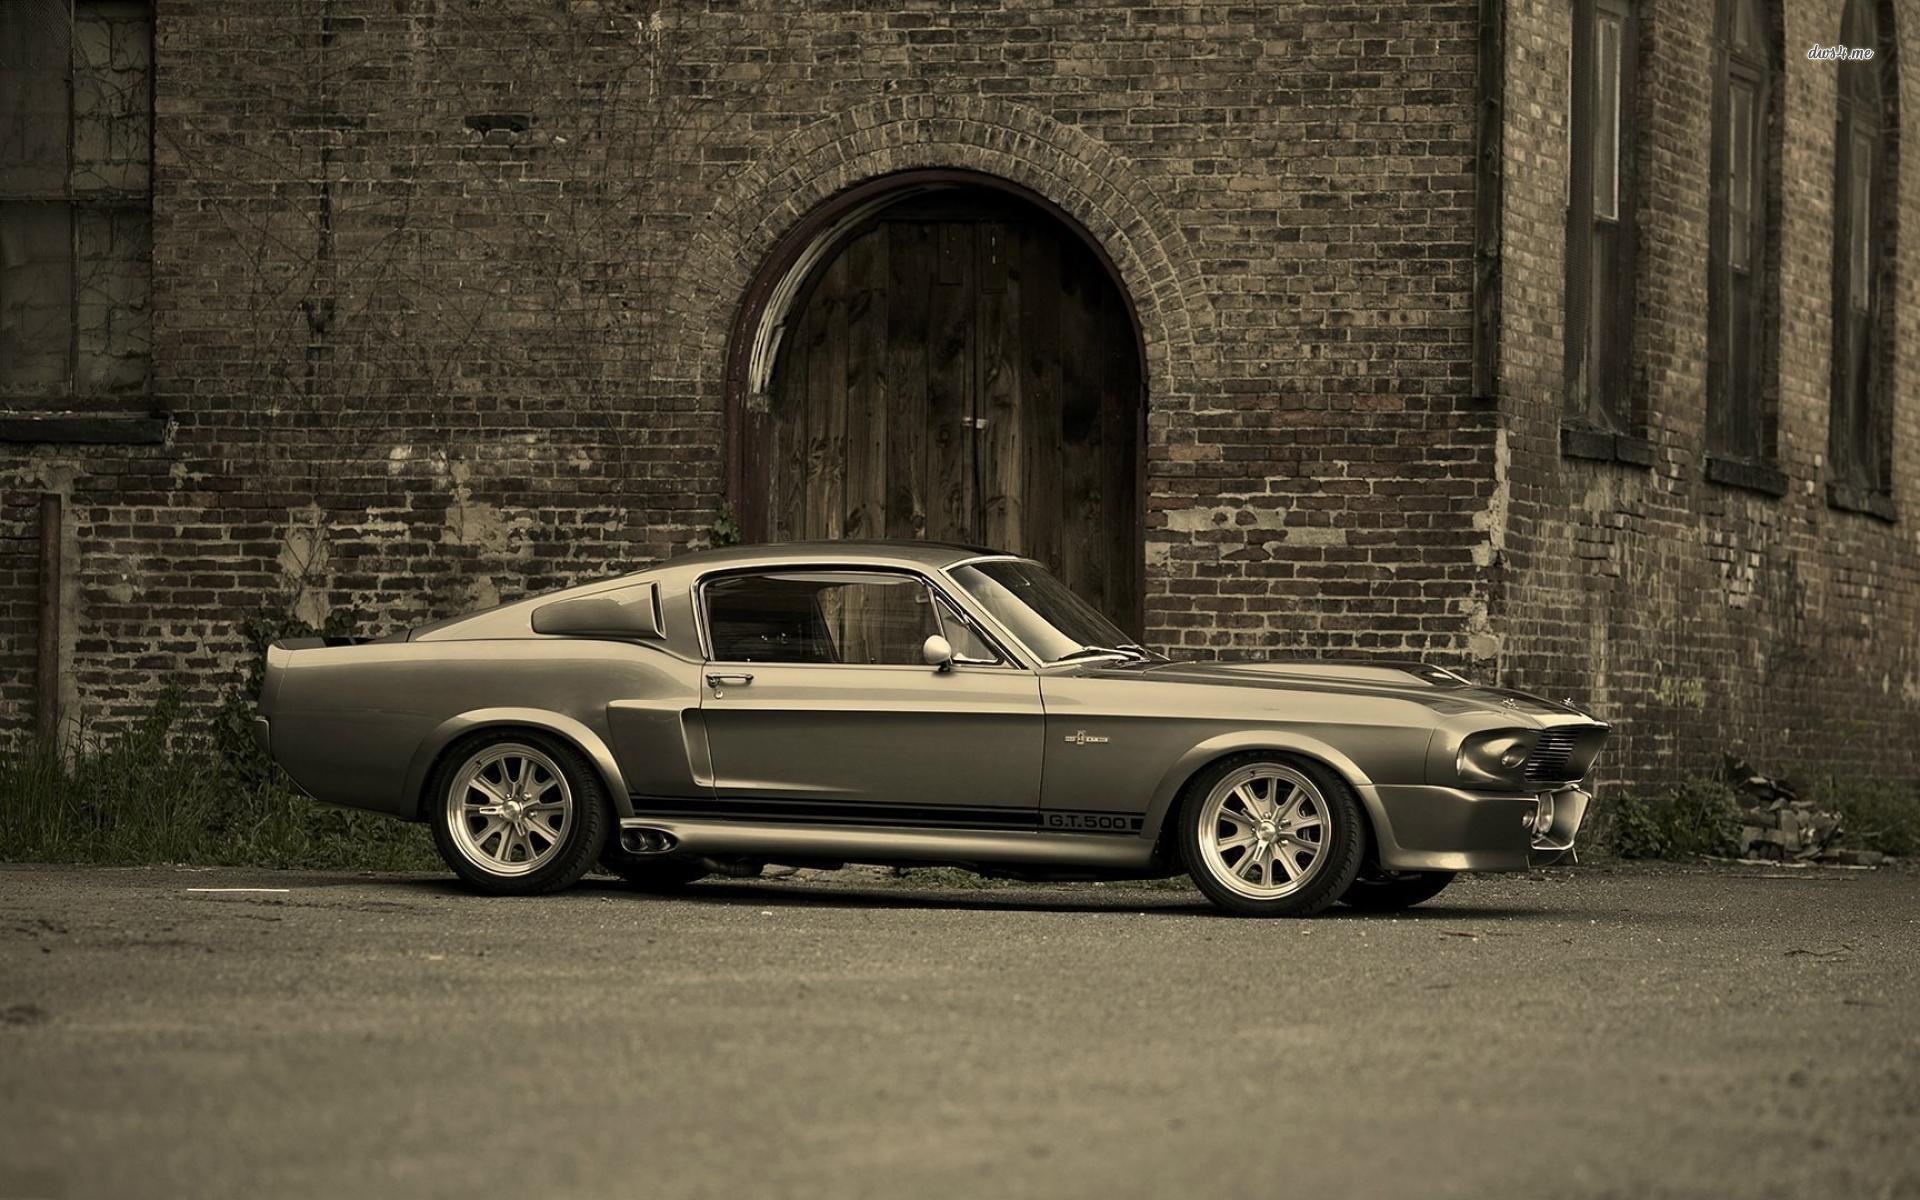 Full Hd Wallpaper Search - Ford Mustang 1967 Shelby Gt500 Eleanor , HD Wallpaper & Backgrounds